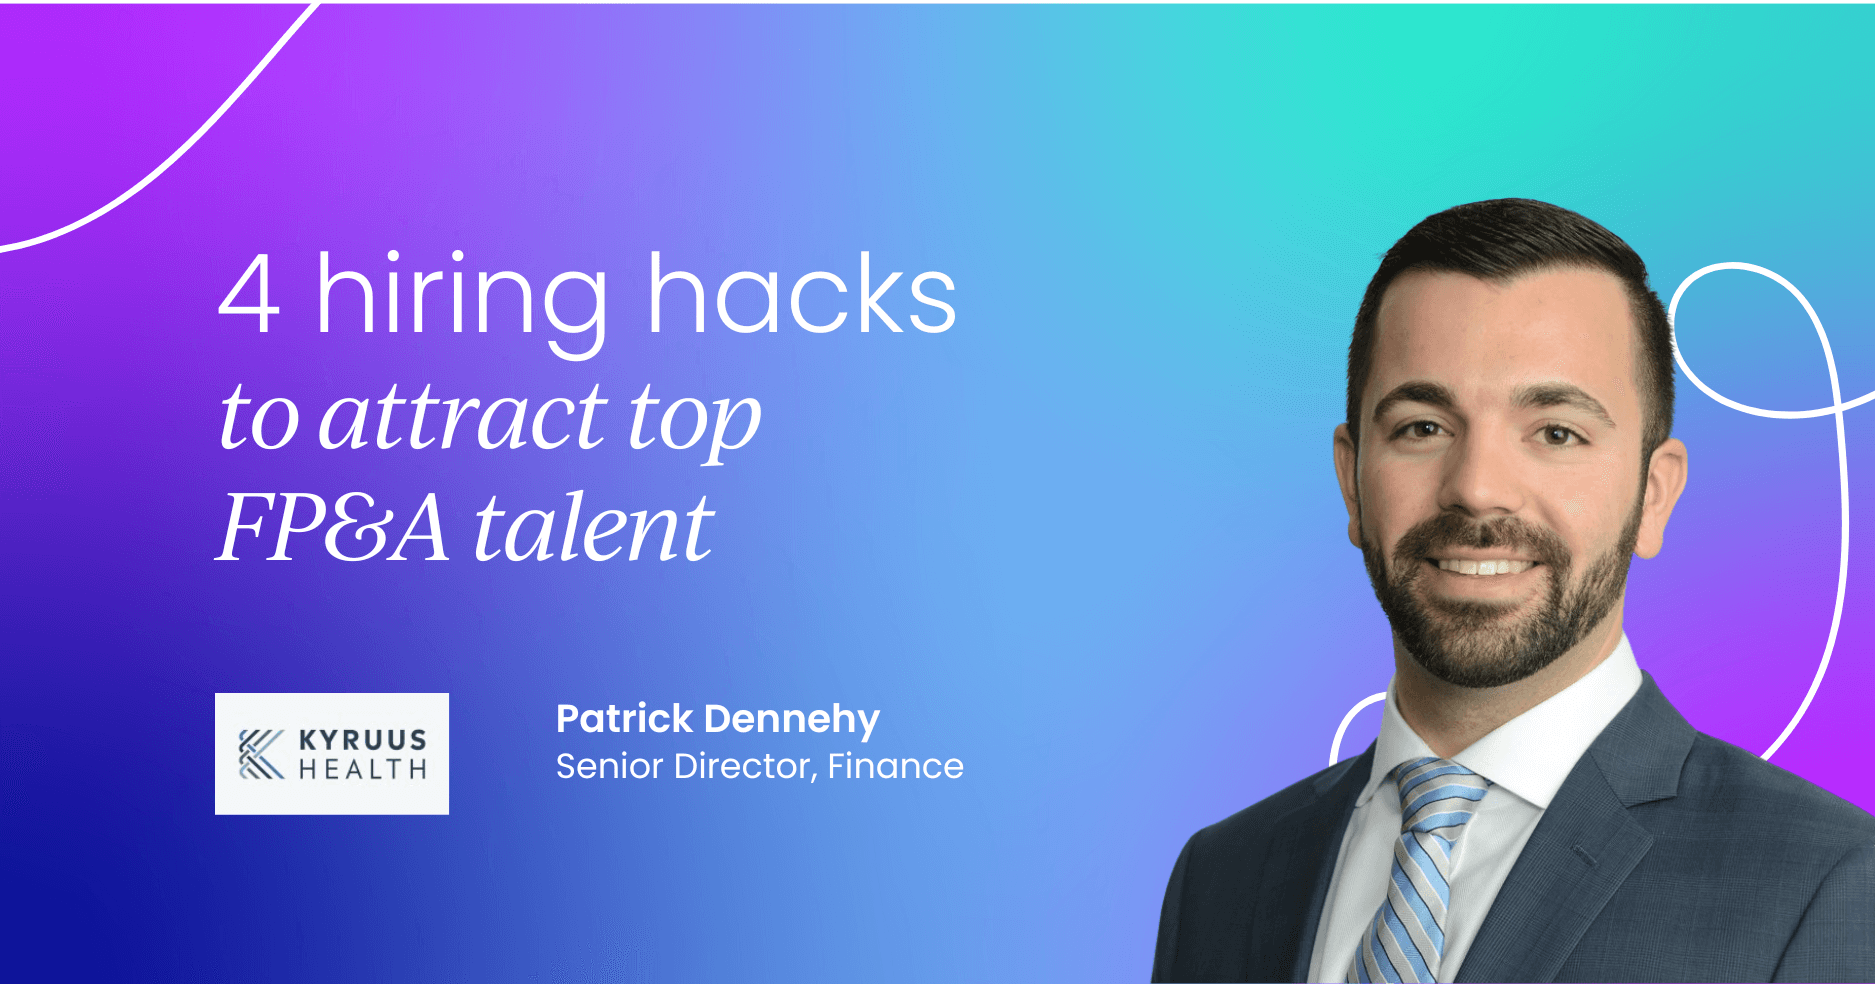 Recruitment in finance: 4 hiring hacks to attract top FP&A talent